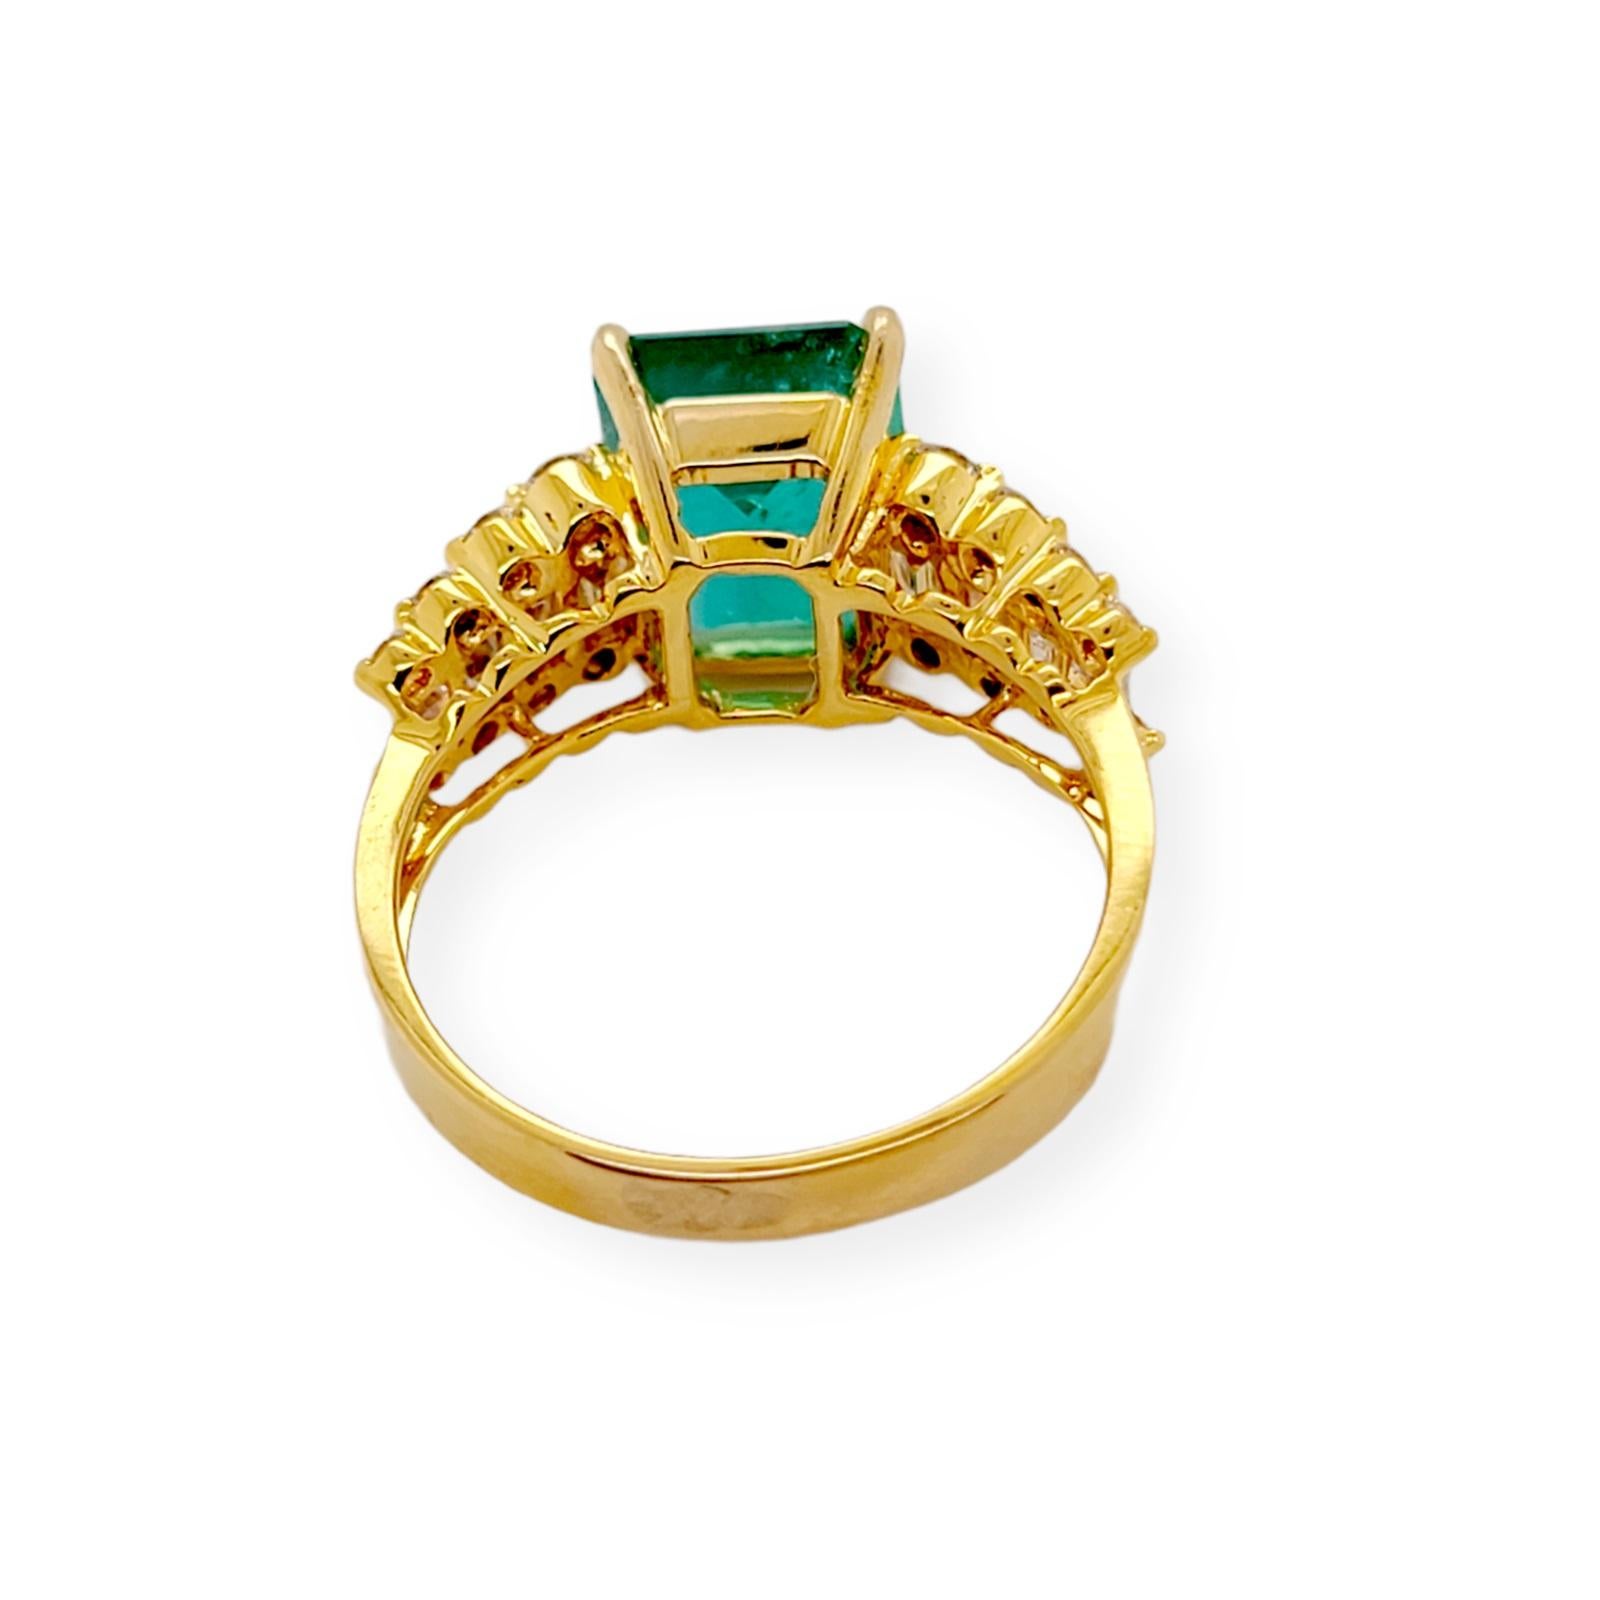 2.58 Ct Zambian Emerald & 1.03 Ct Diamonds in 18k Yellow Gold Engagement Ring In Excellent Condition For Sale In Los Angeles, CA